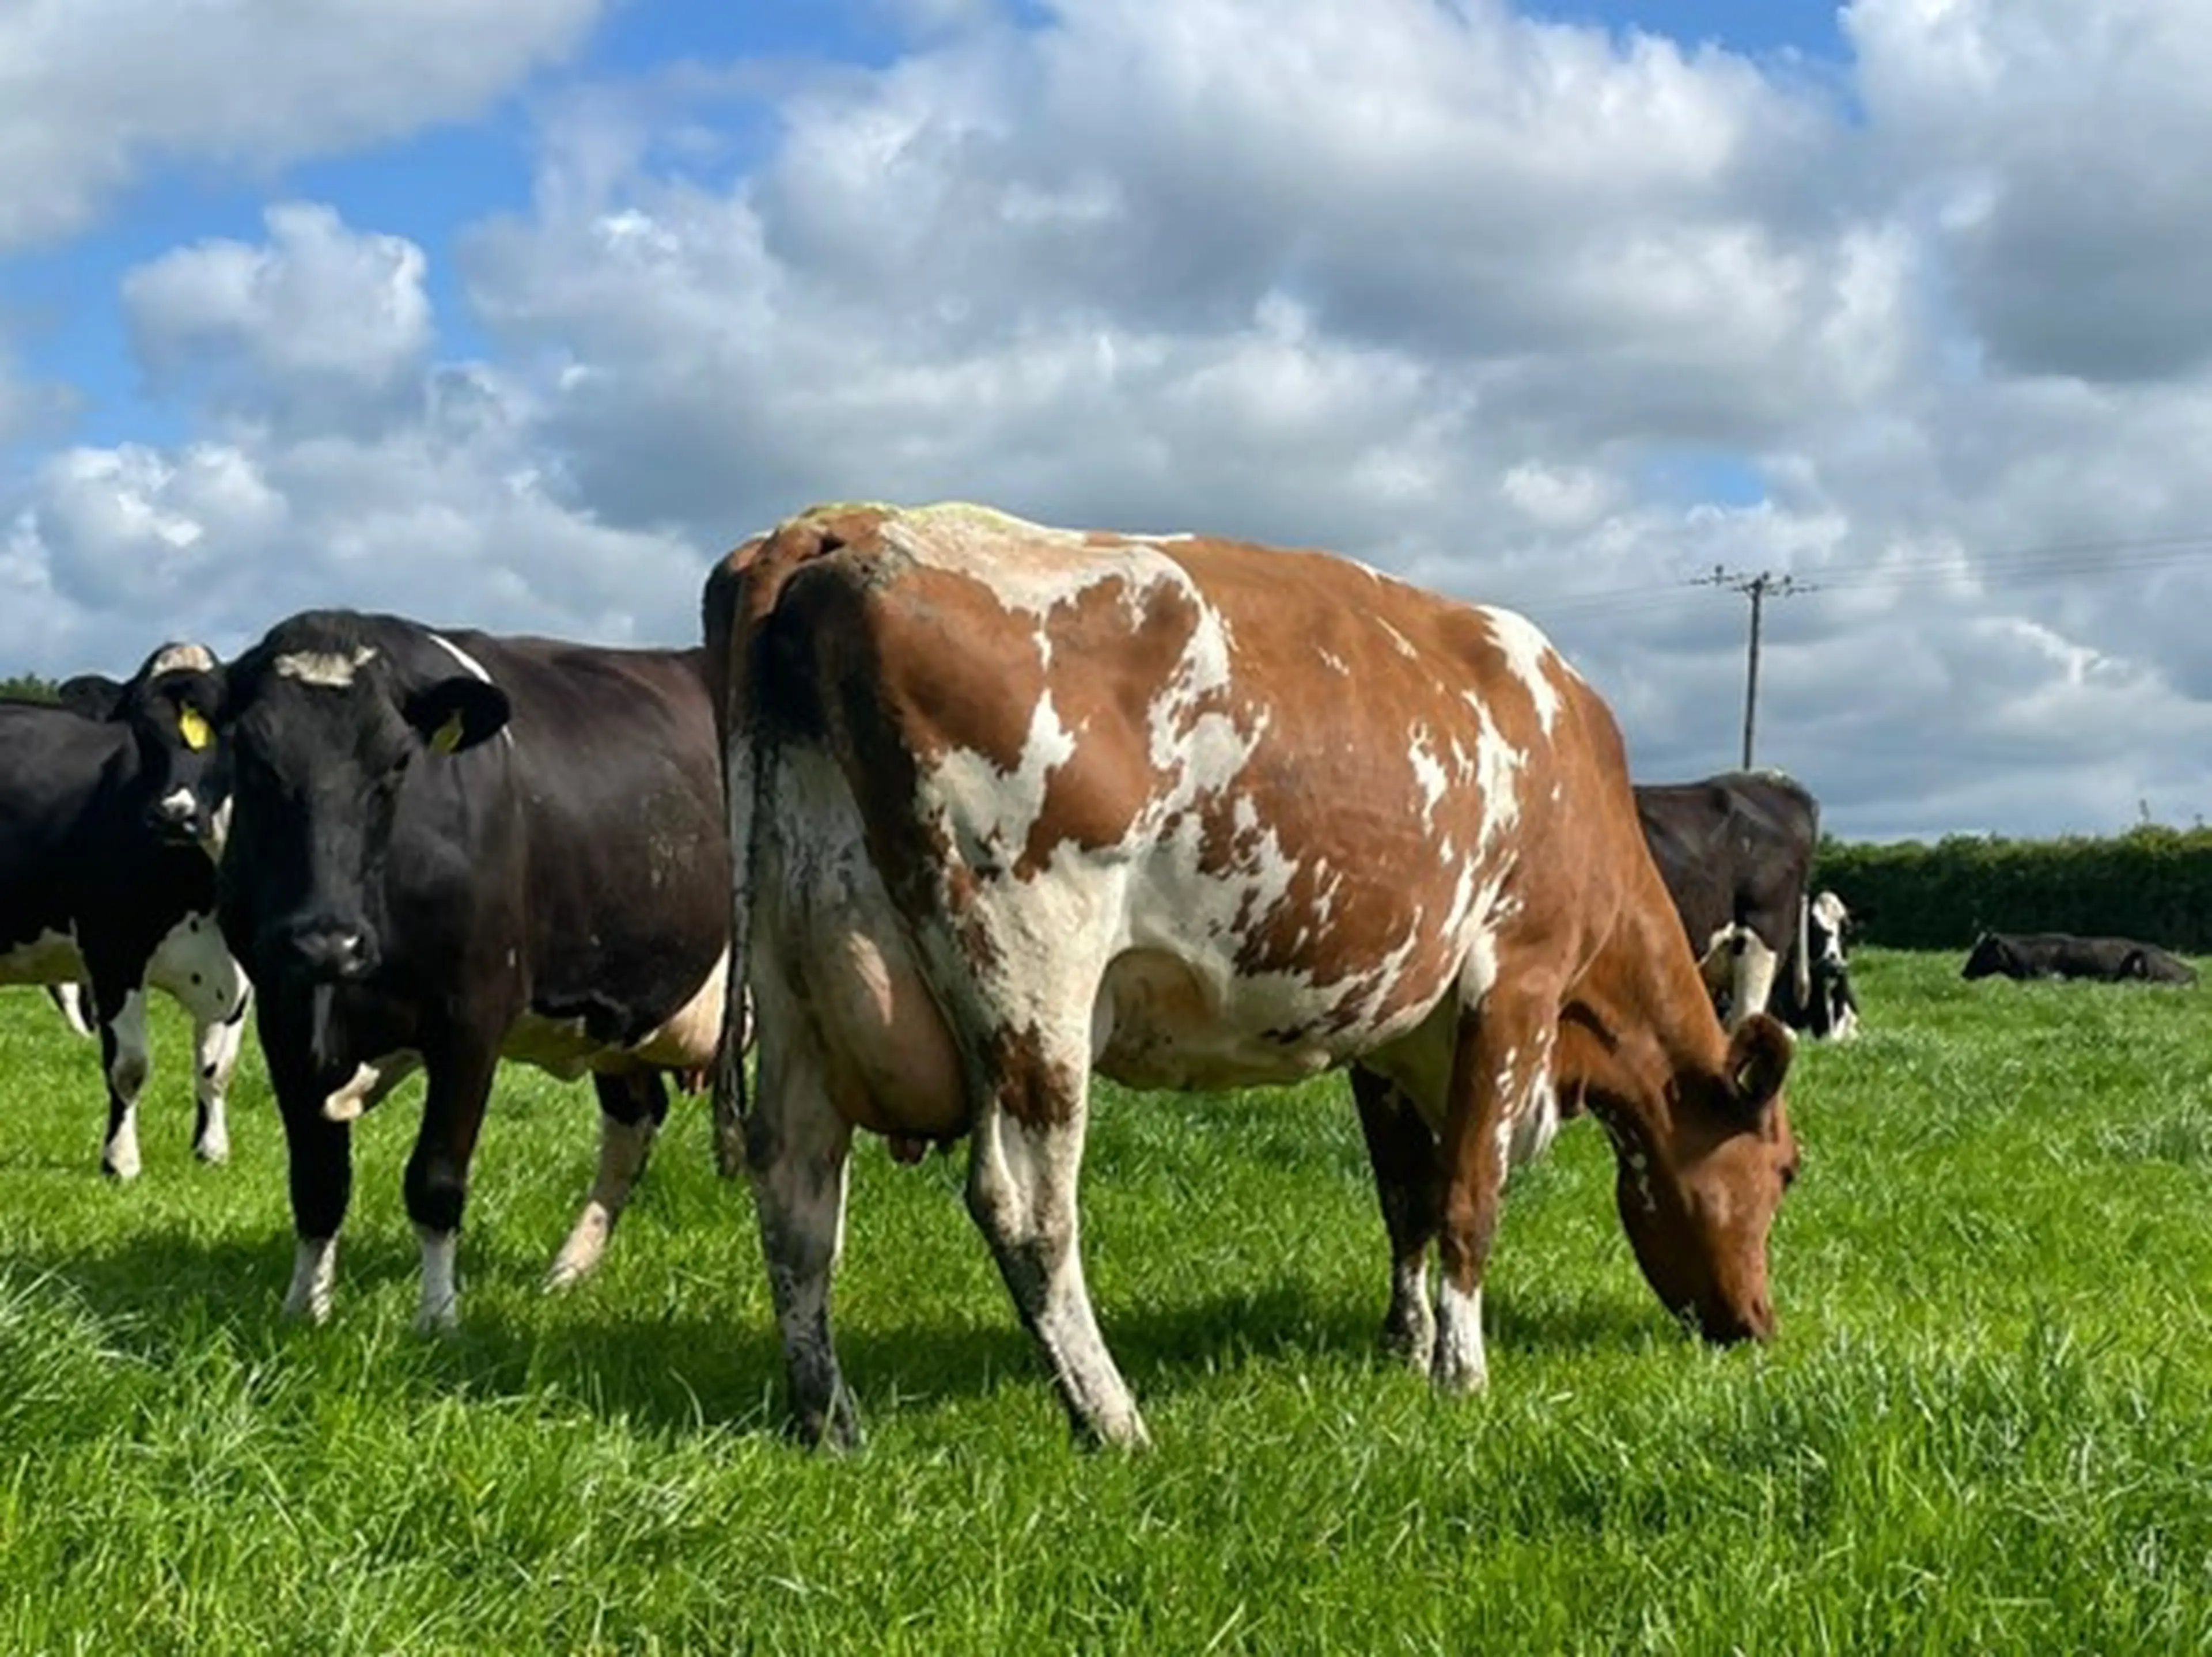 Figure 3 Reitan 2 NR2016 sire of many Norwegian Red bulls. Reitan 2 is a tall Irish daughter proven bull whose daughters have increased milk solid kgs compared to their herd mates.